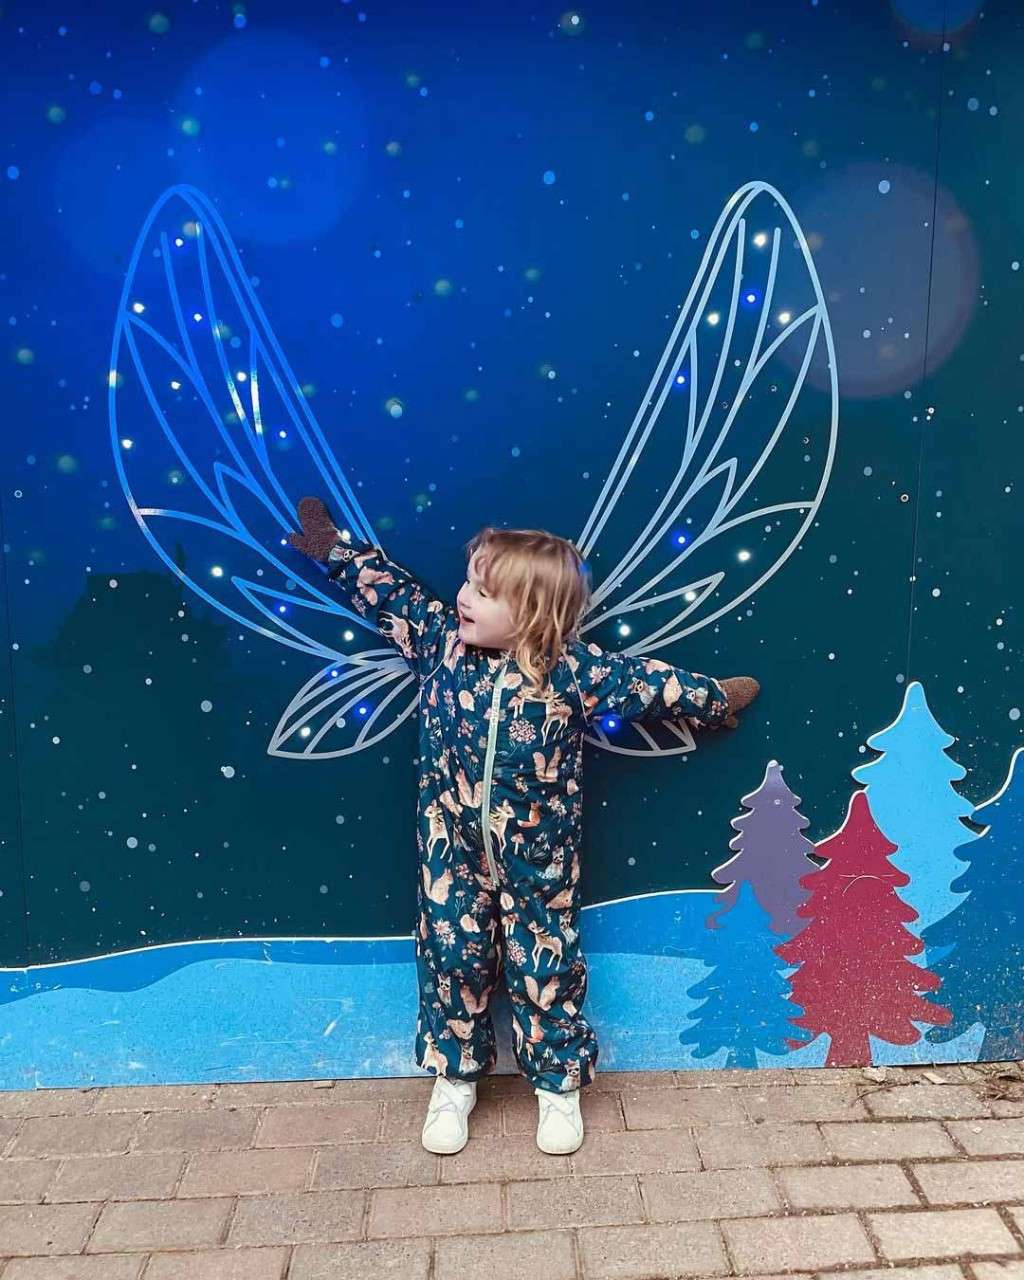 A child stood in front of a wall with light up wings behind them.